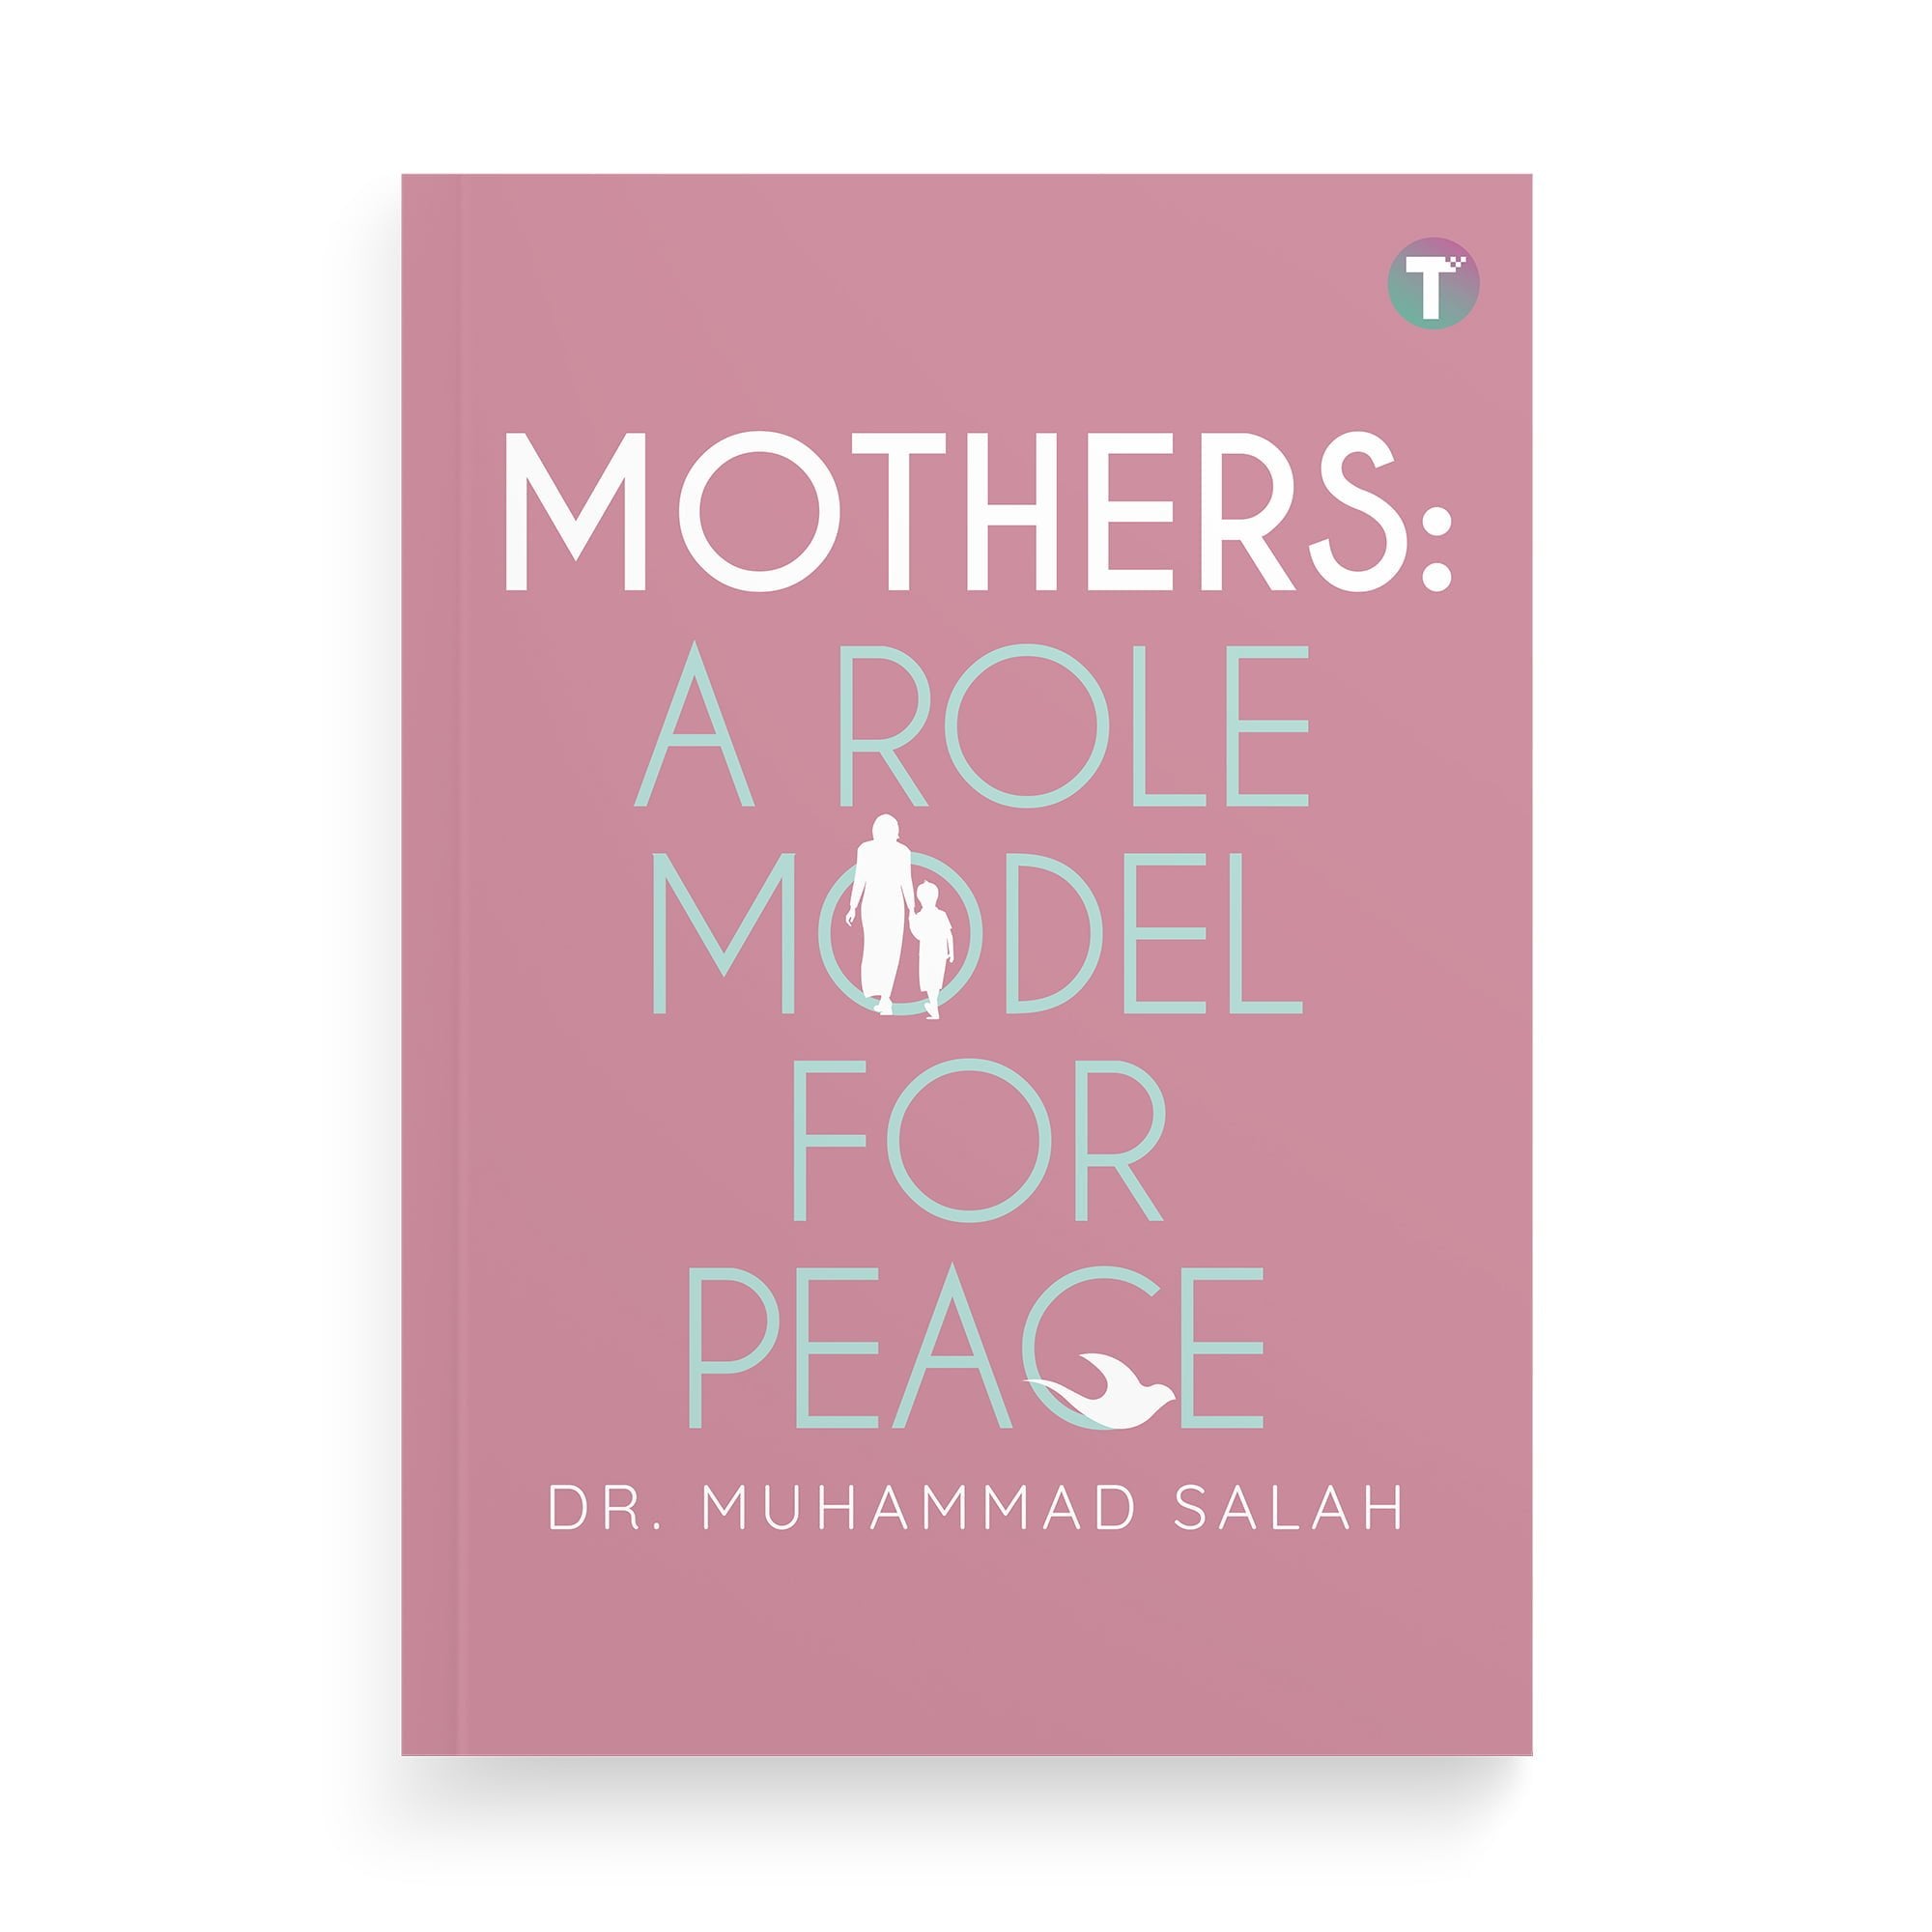 Mothers: A Role Model for Peace